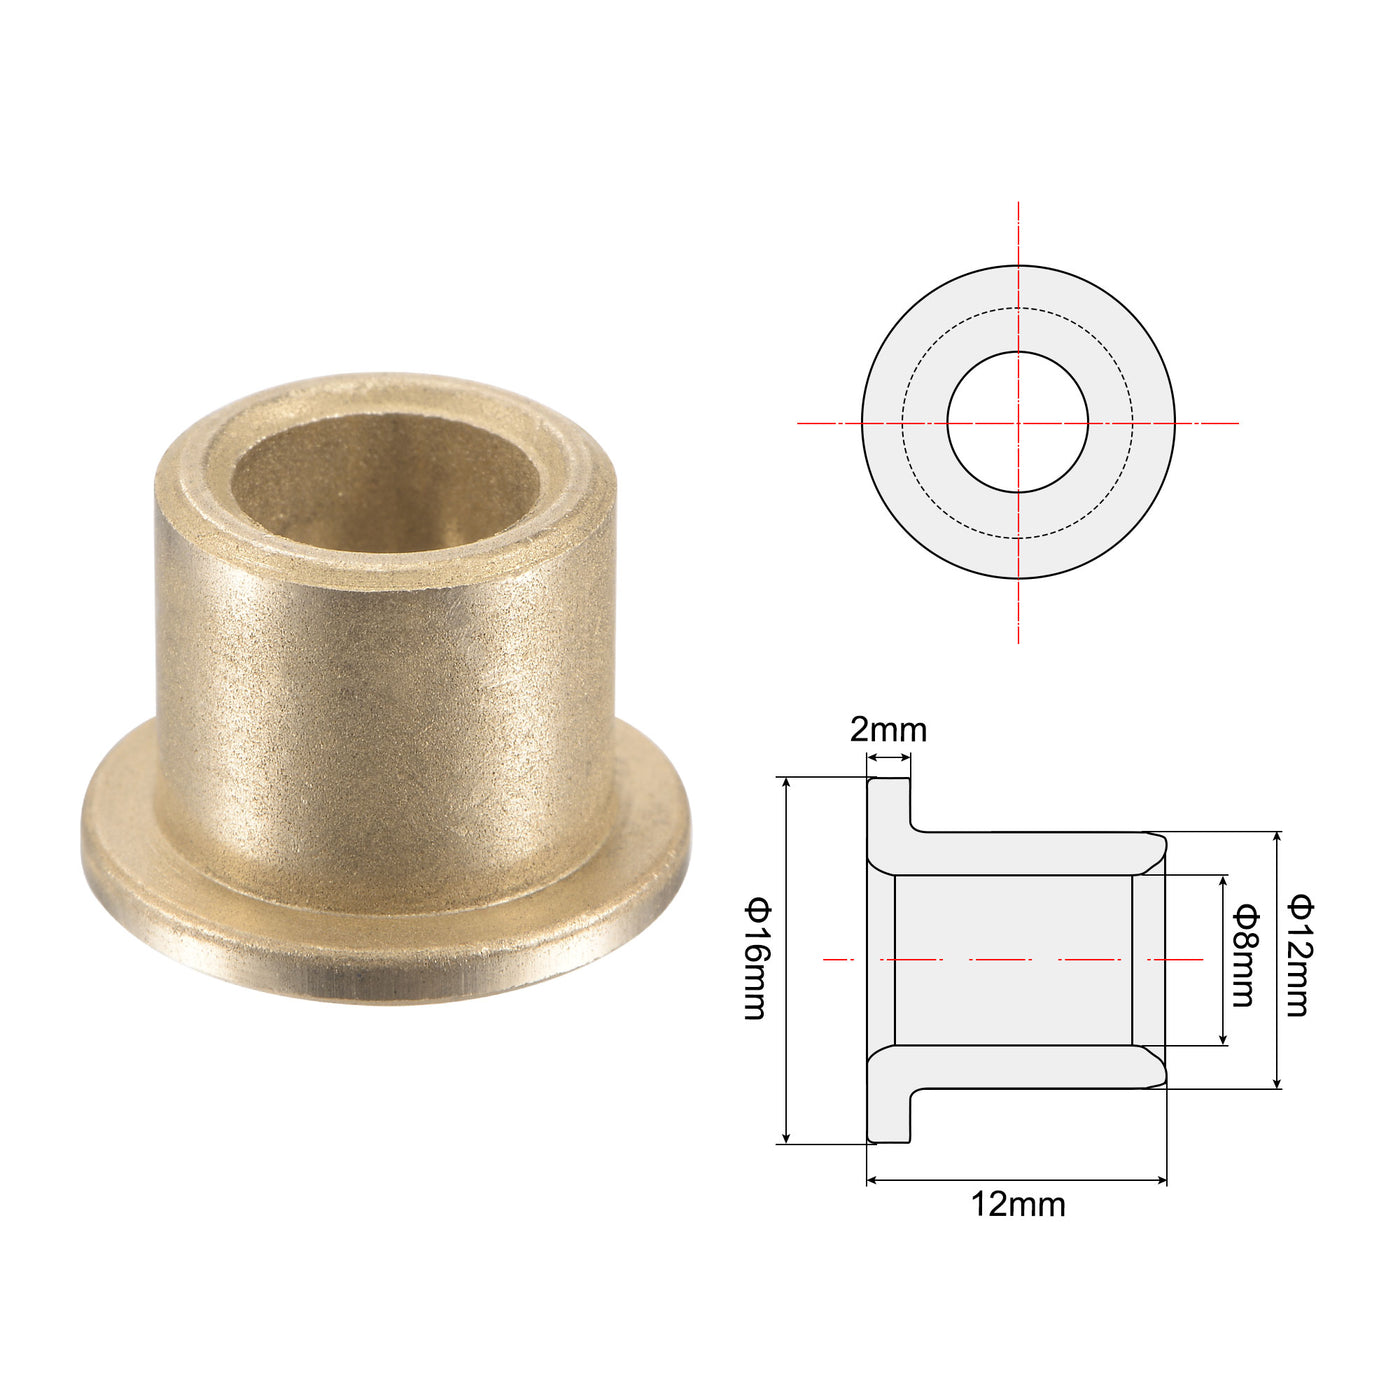 uxcell Uxcell Flange Sleeve Bearings Sintered Bronze Self-Lubricating Bushing